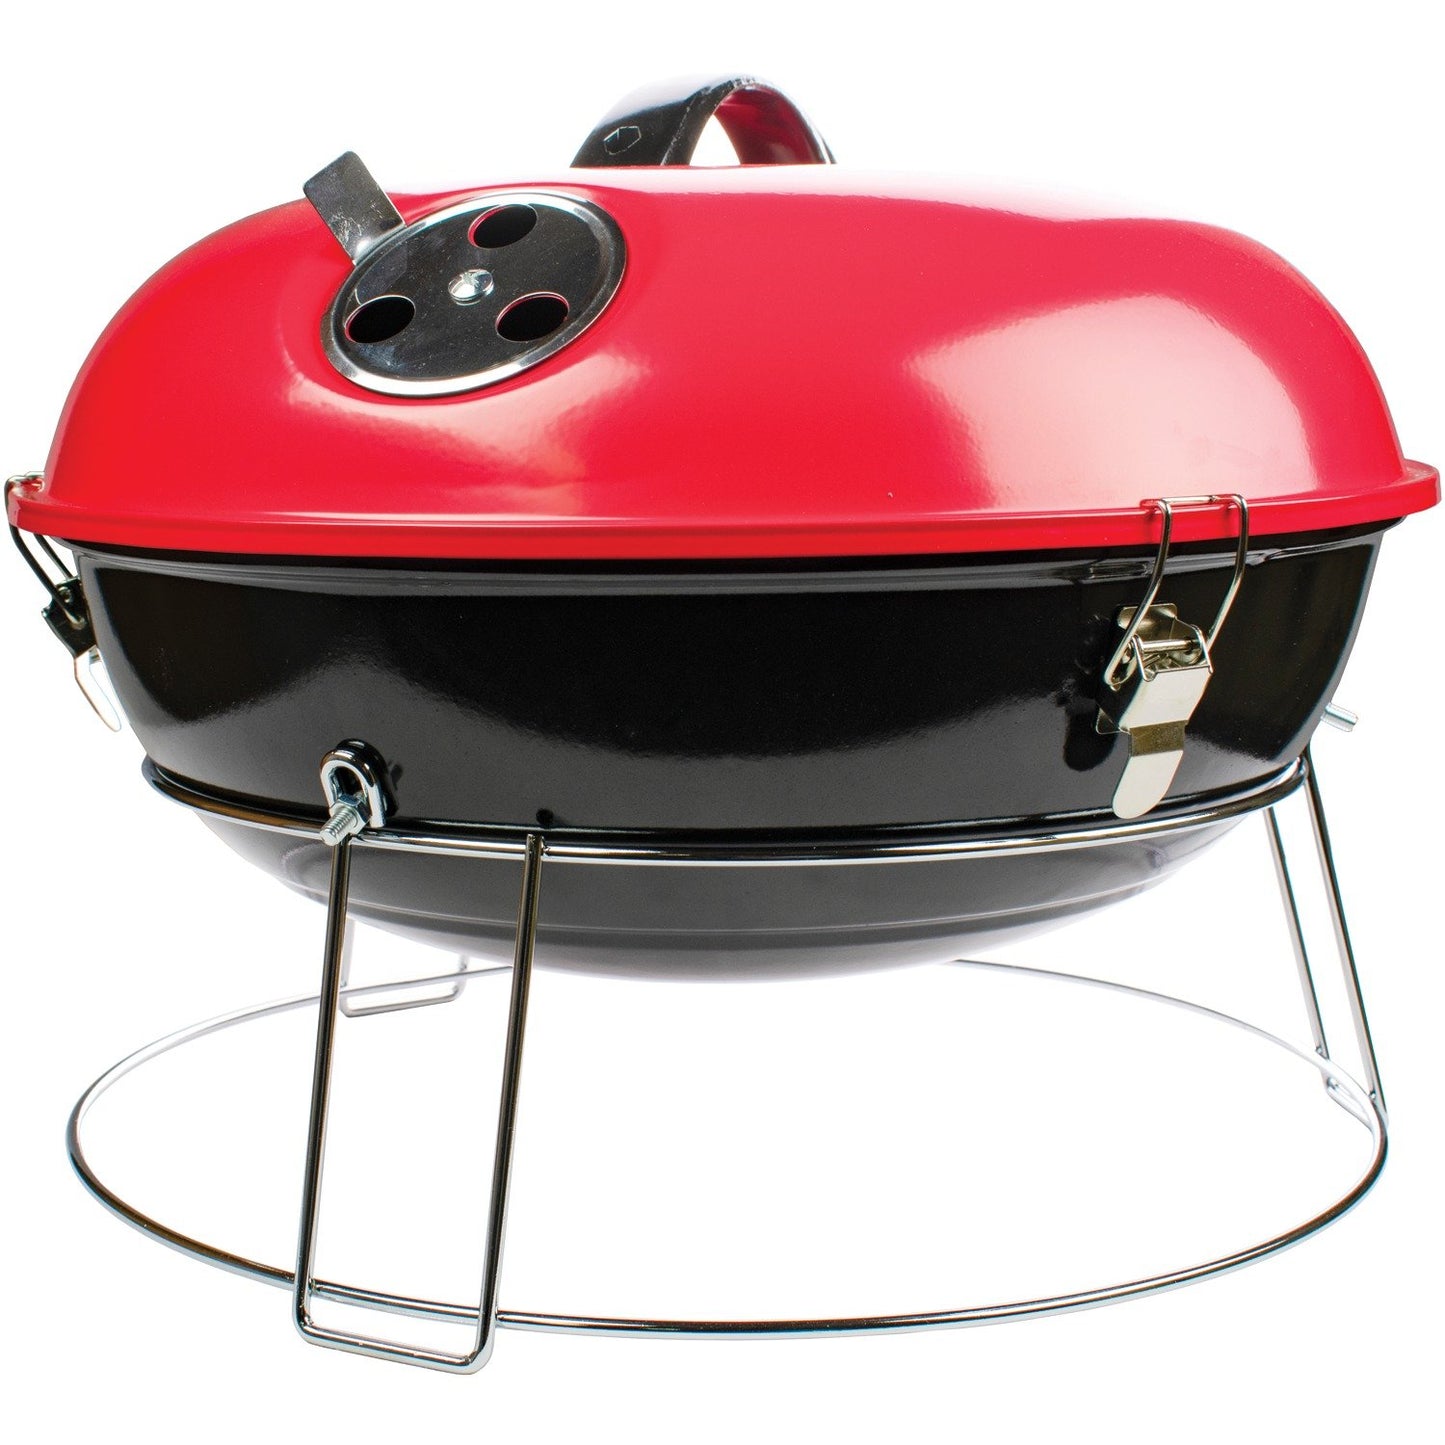 Brentwood Appl. BB-1400R 14" Portable Charcoal Grill (Red)